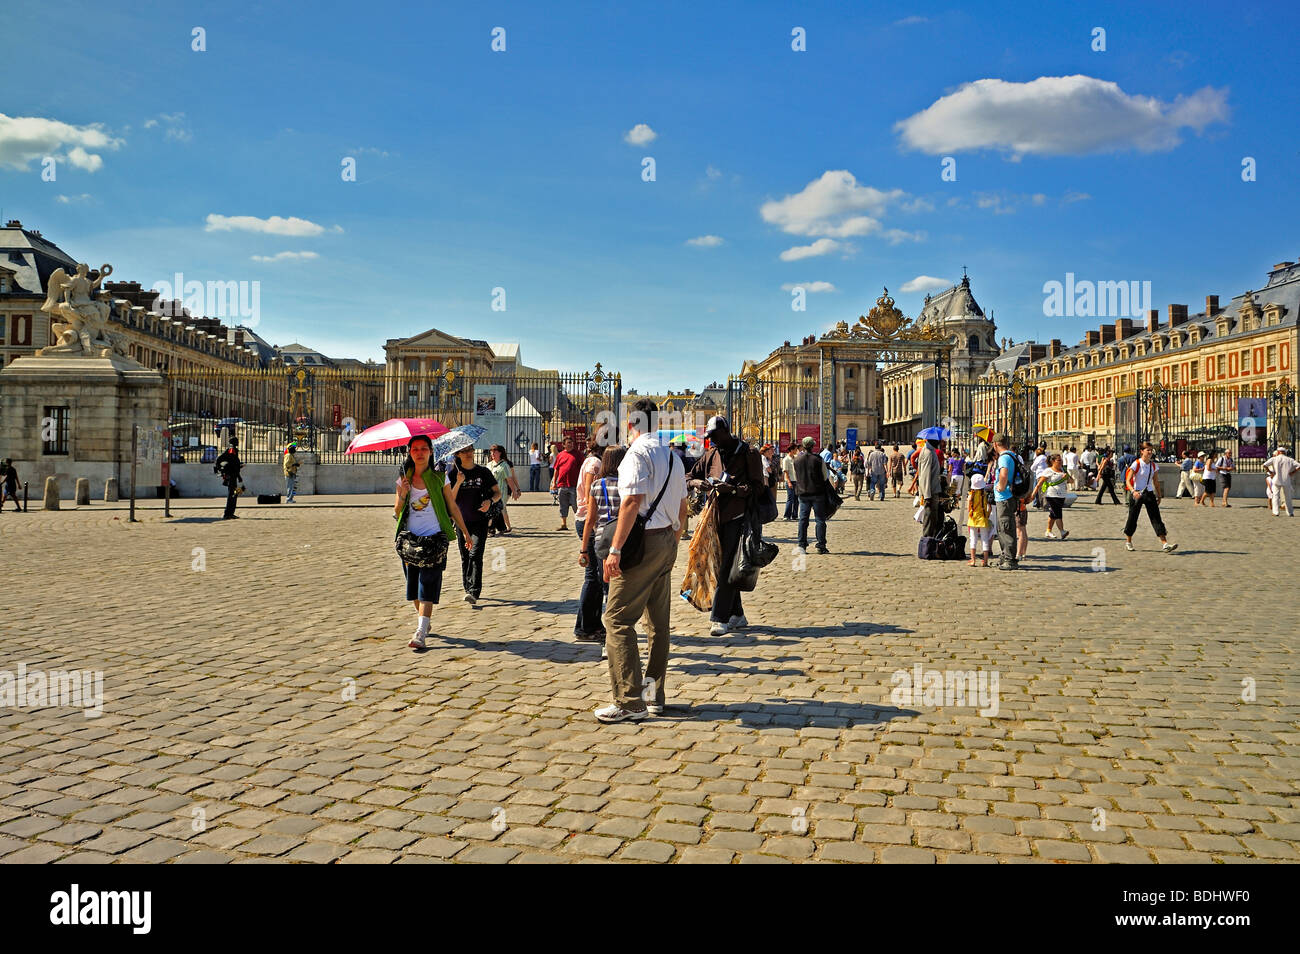 Versailles Palace - Tourists Visiting French Monument, 'Chateau de Versailles', with Immigrant Sidewalk Souvenir Hawker, front of French chateau, Stock Photo